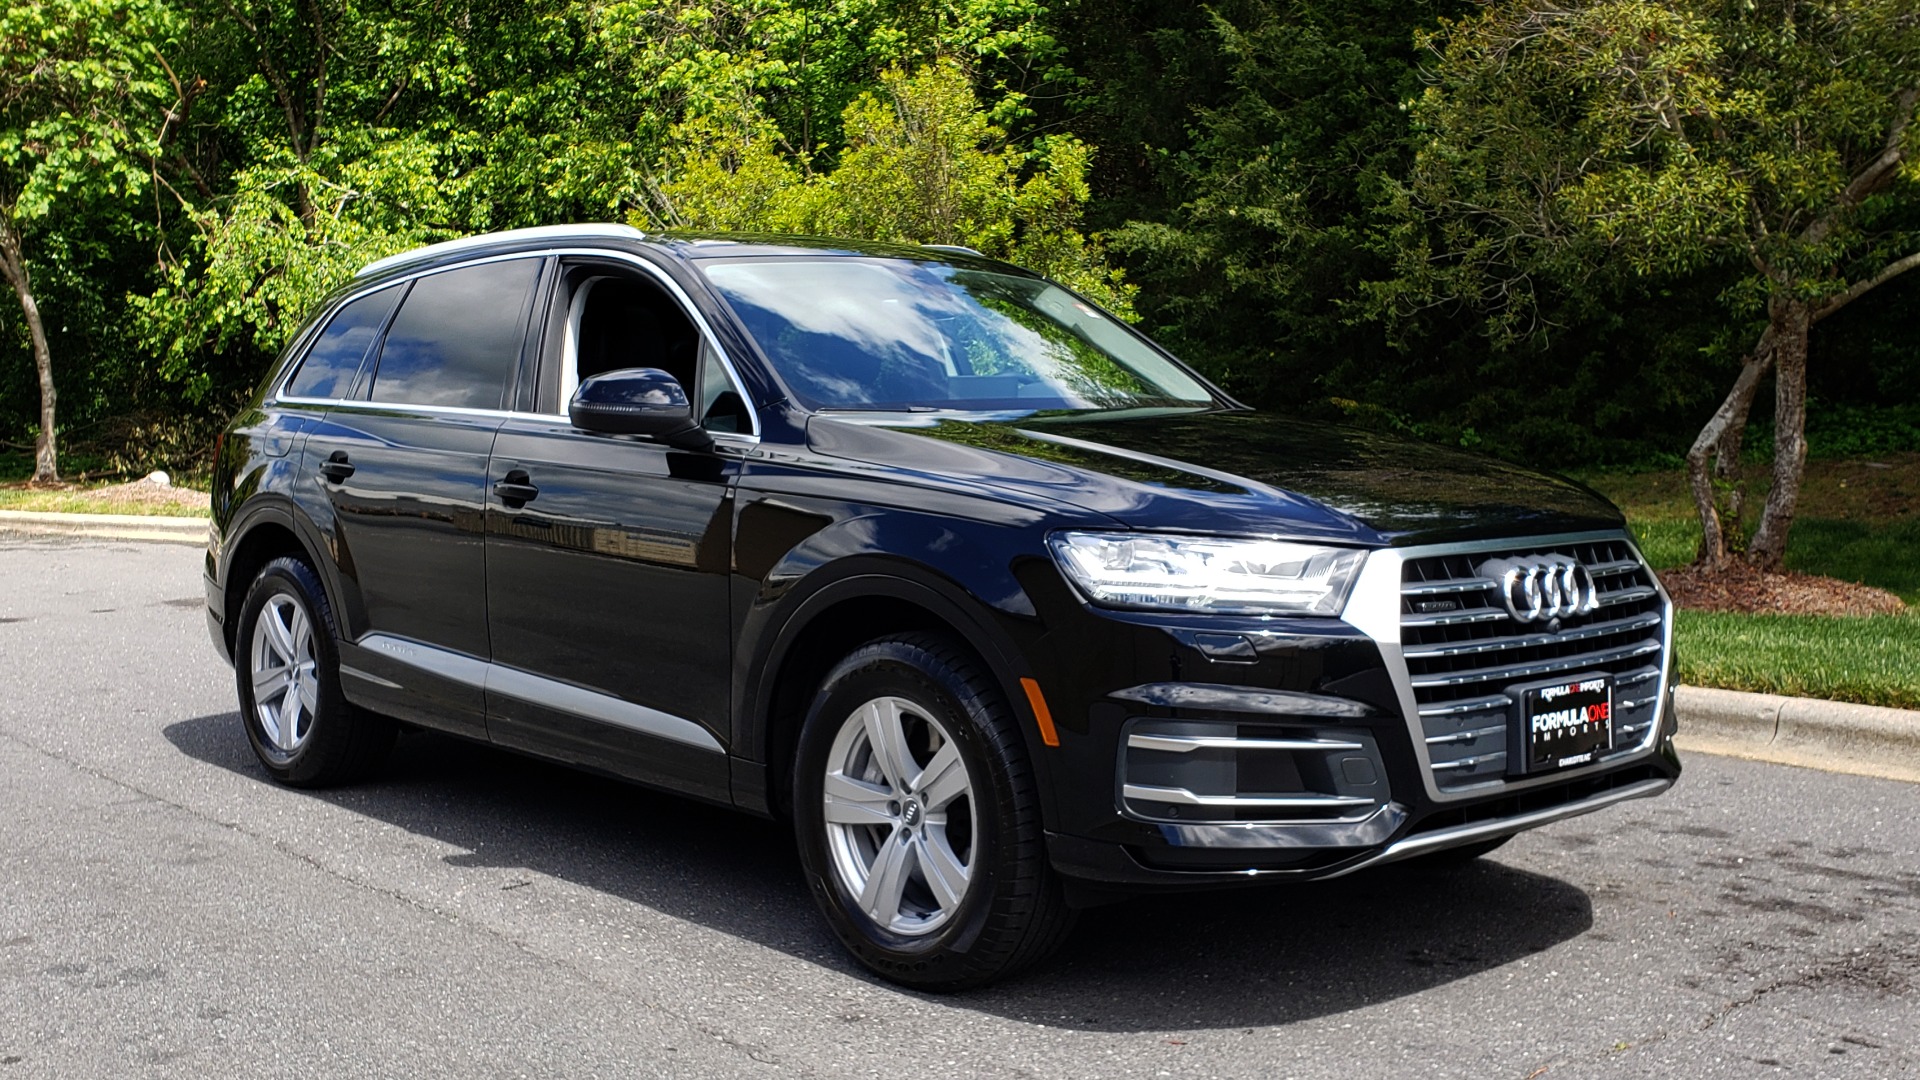 Used 2017 Audi Q7 PREMIUM PLUS / VISION PKG / NAV / PANO-ROOF / 3-ROW / REARVIEW for sale Sold at Formula Imports in Charlotte NC 28227 4